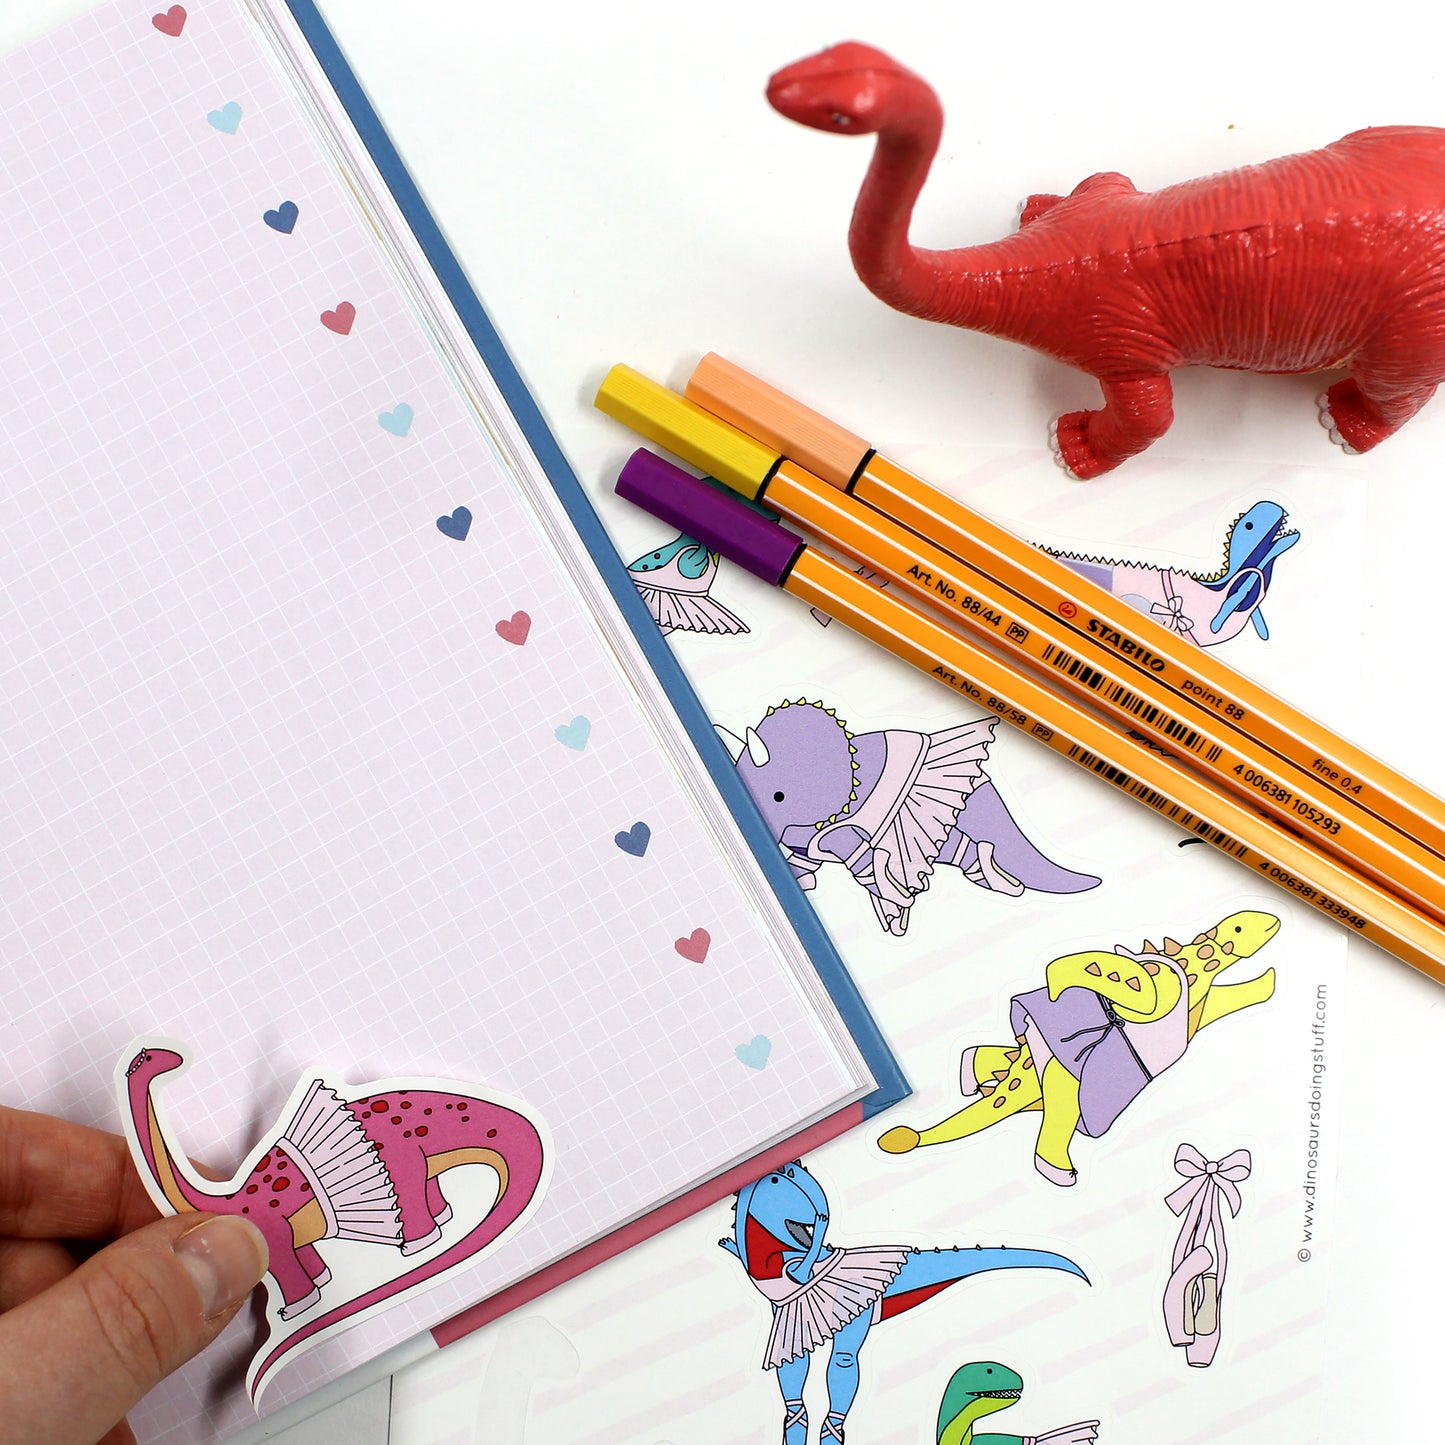 ballet dinosaur stickers on a notebook with pens